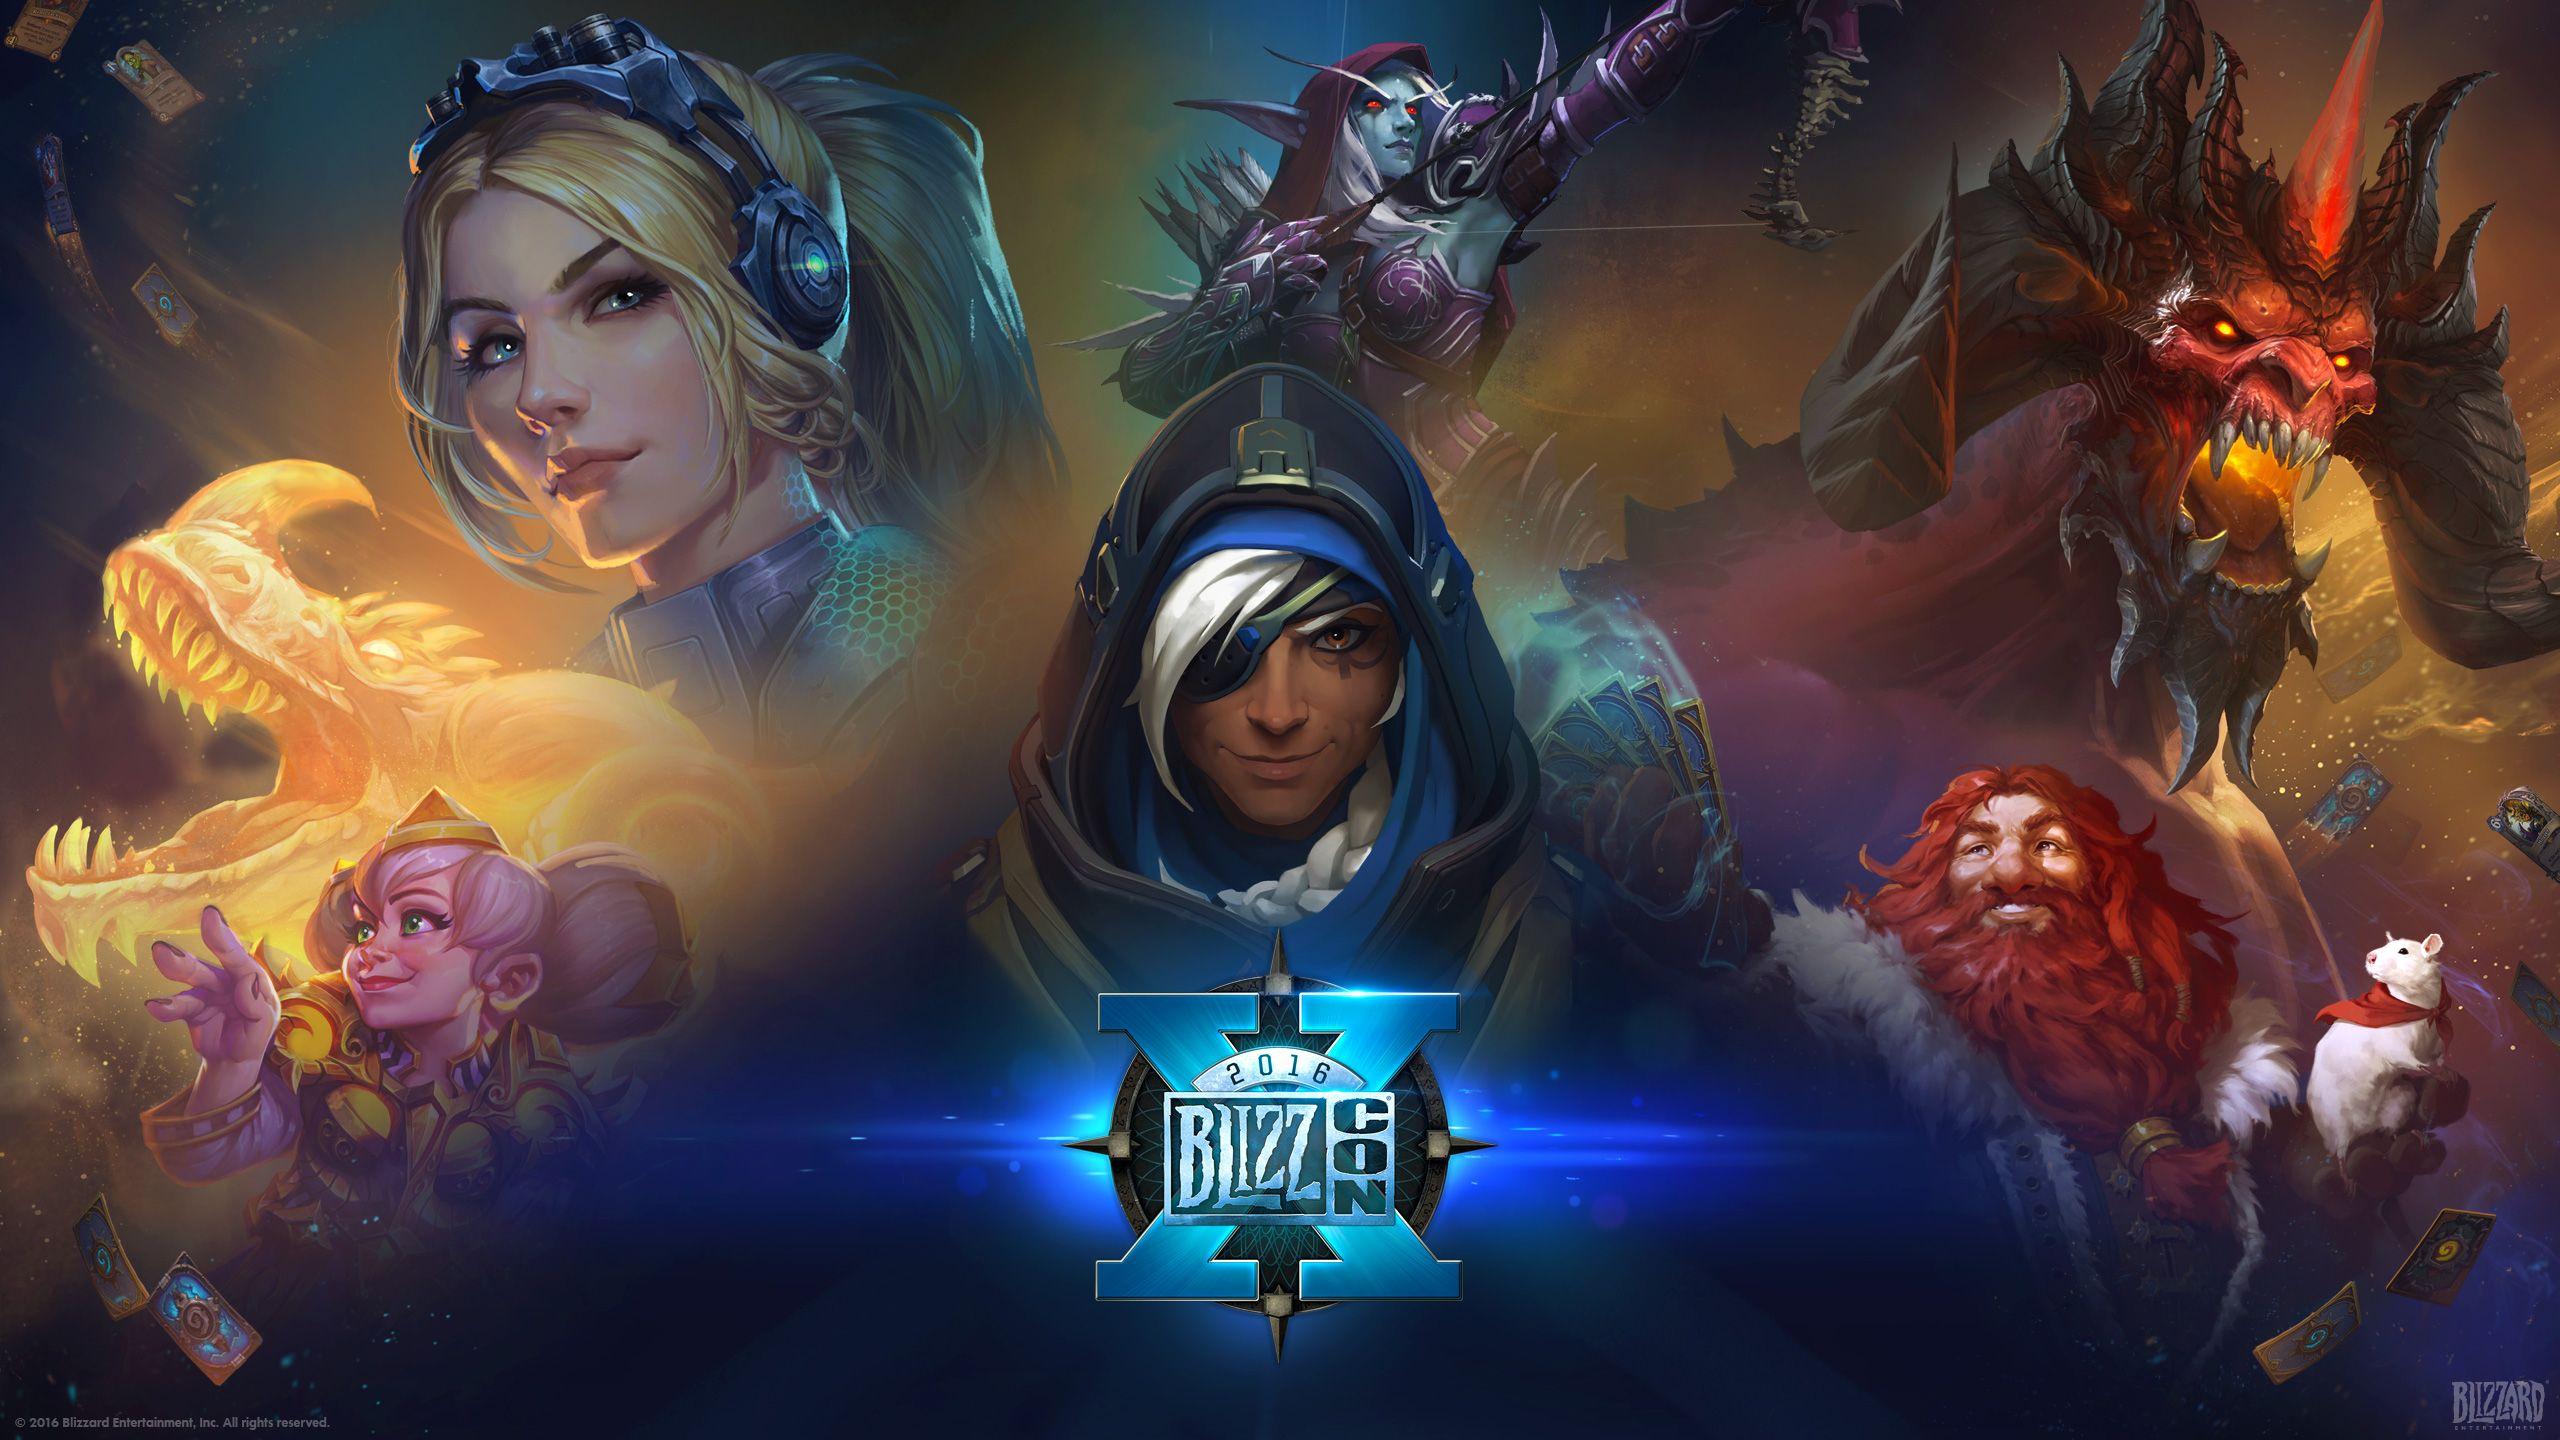 Blizzcon wide backgrounds